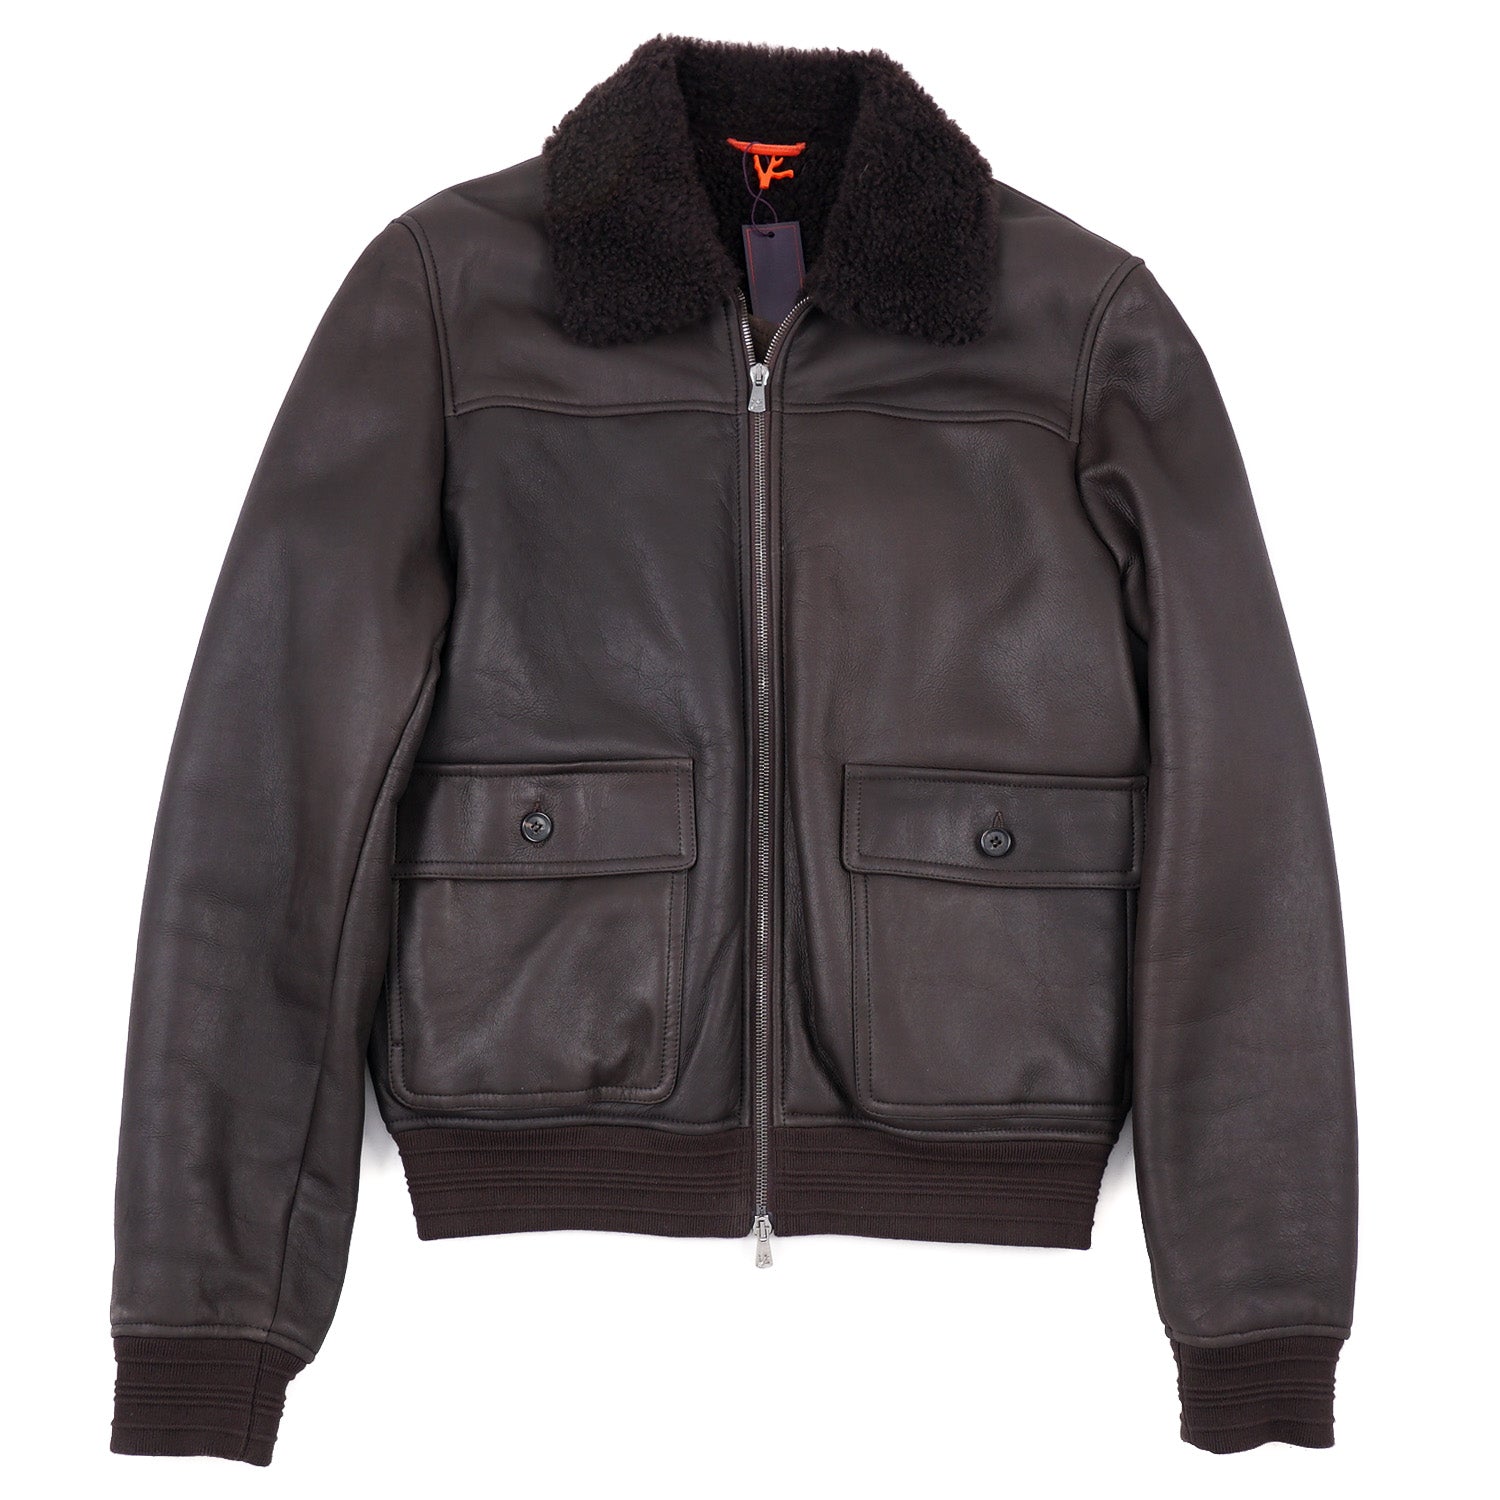 Isaia Shearling Leather Bomber Jacket - Top Shelf Apparel